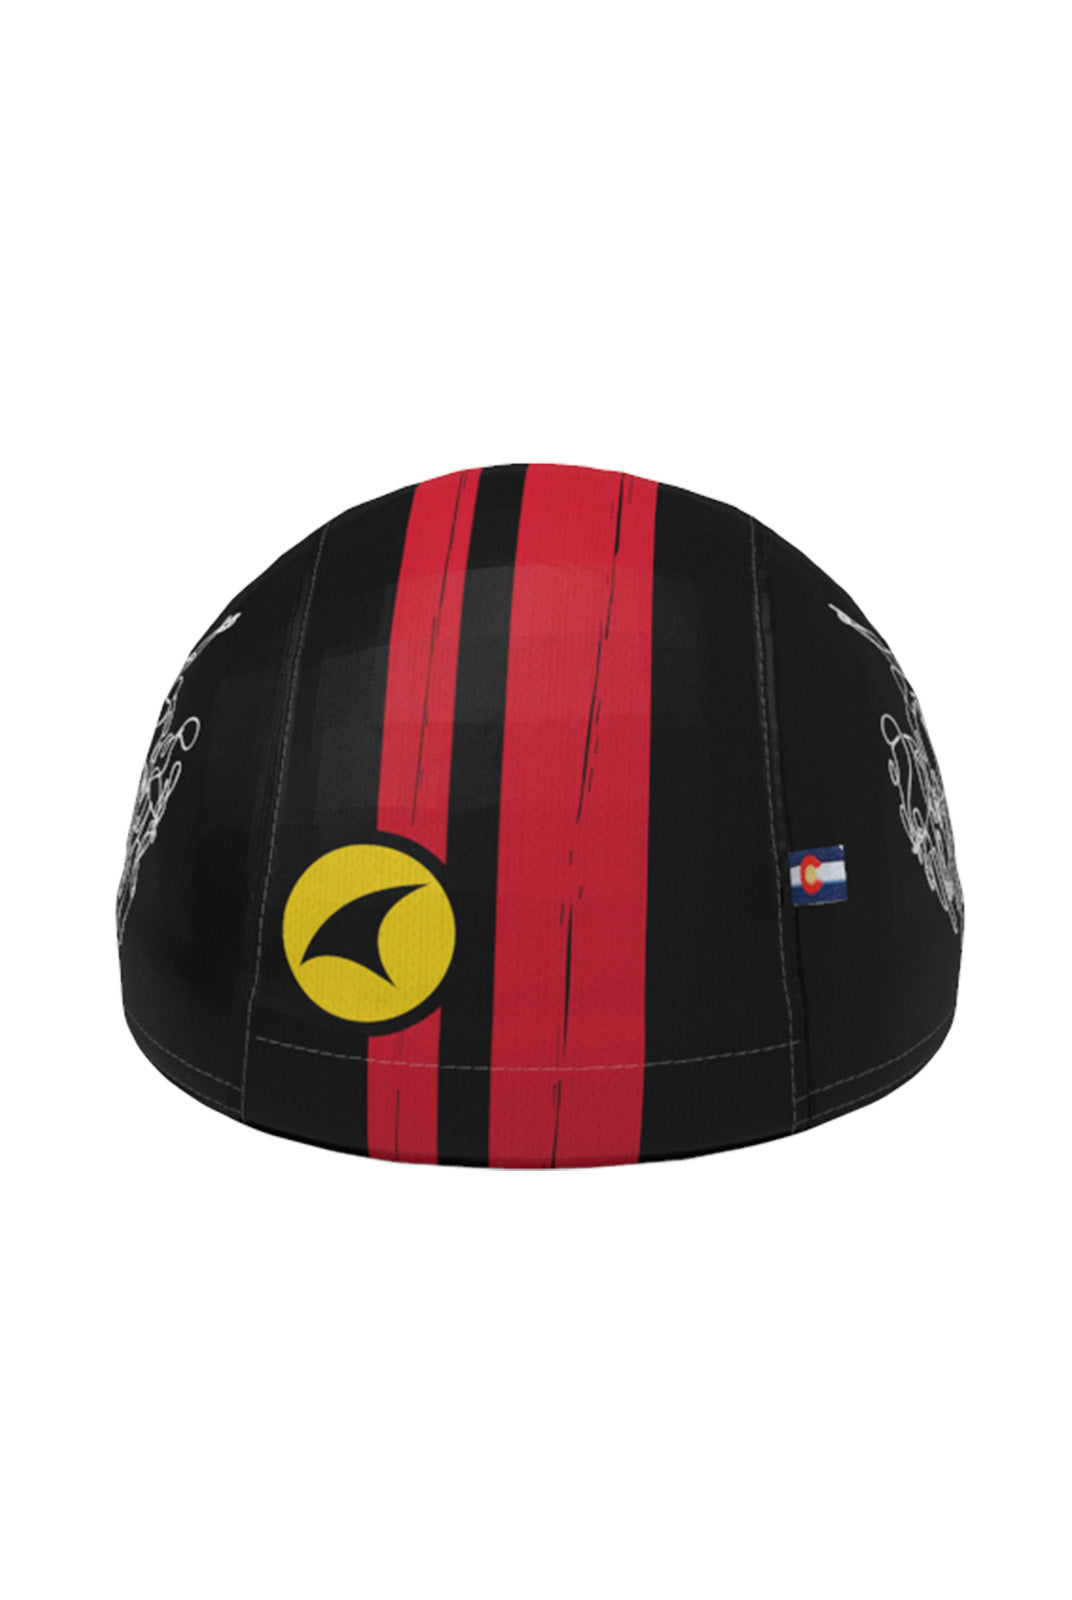 Cycling Cap - Power, Pride, Legacy back view